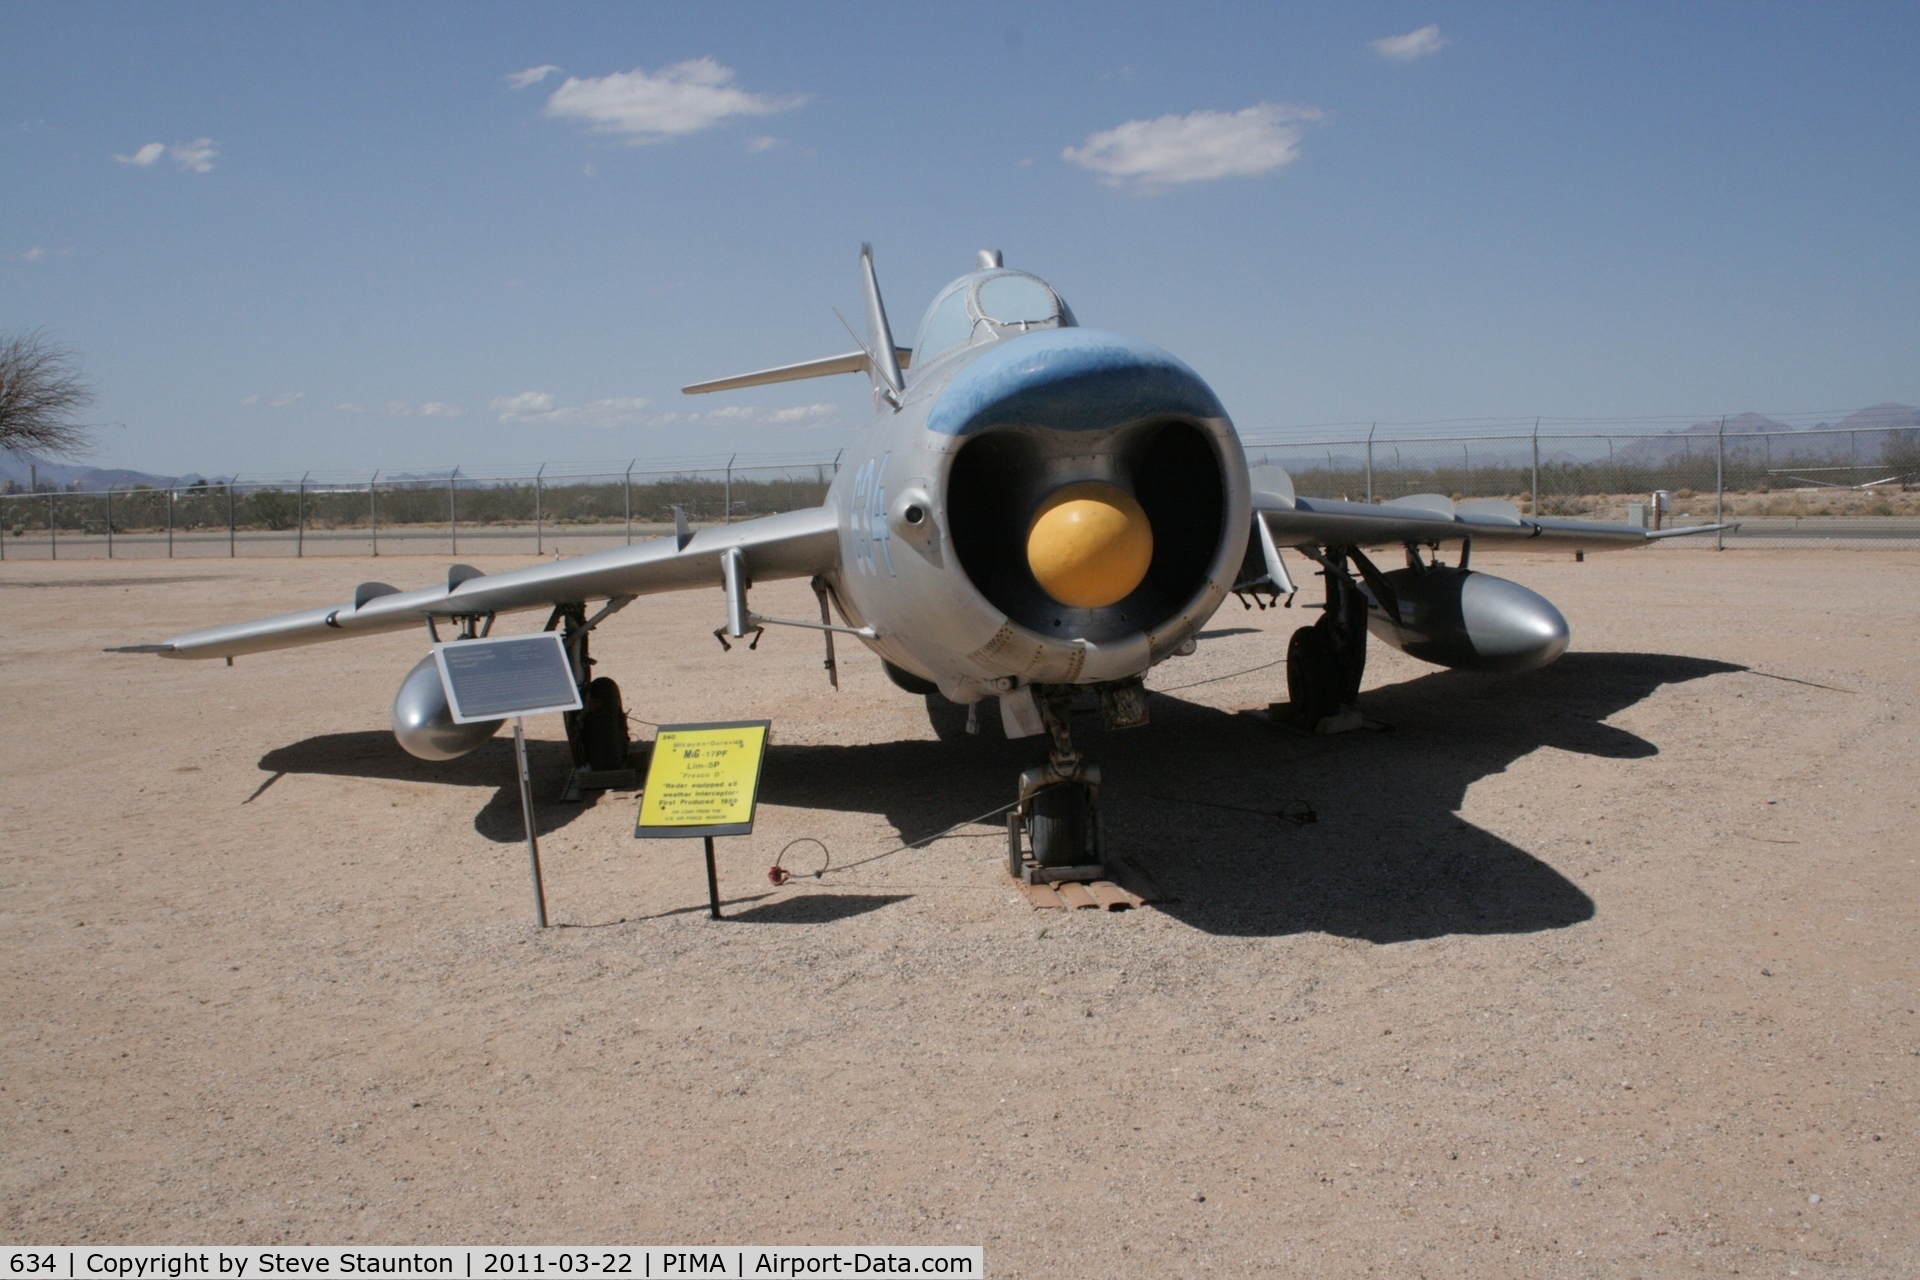 634, Mikoyan-Gurevich MiG-17PF C/N 1D-0634, Taken at Pima Air and Space Museum, in March 2011 whilst on an Aeroprint Aviation tour